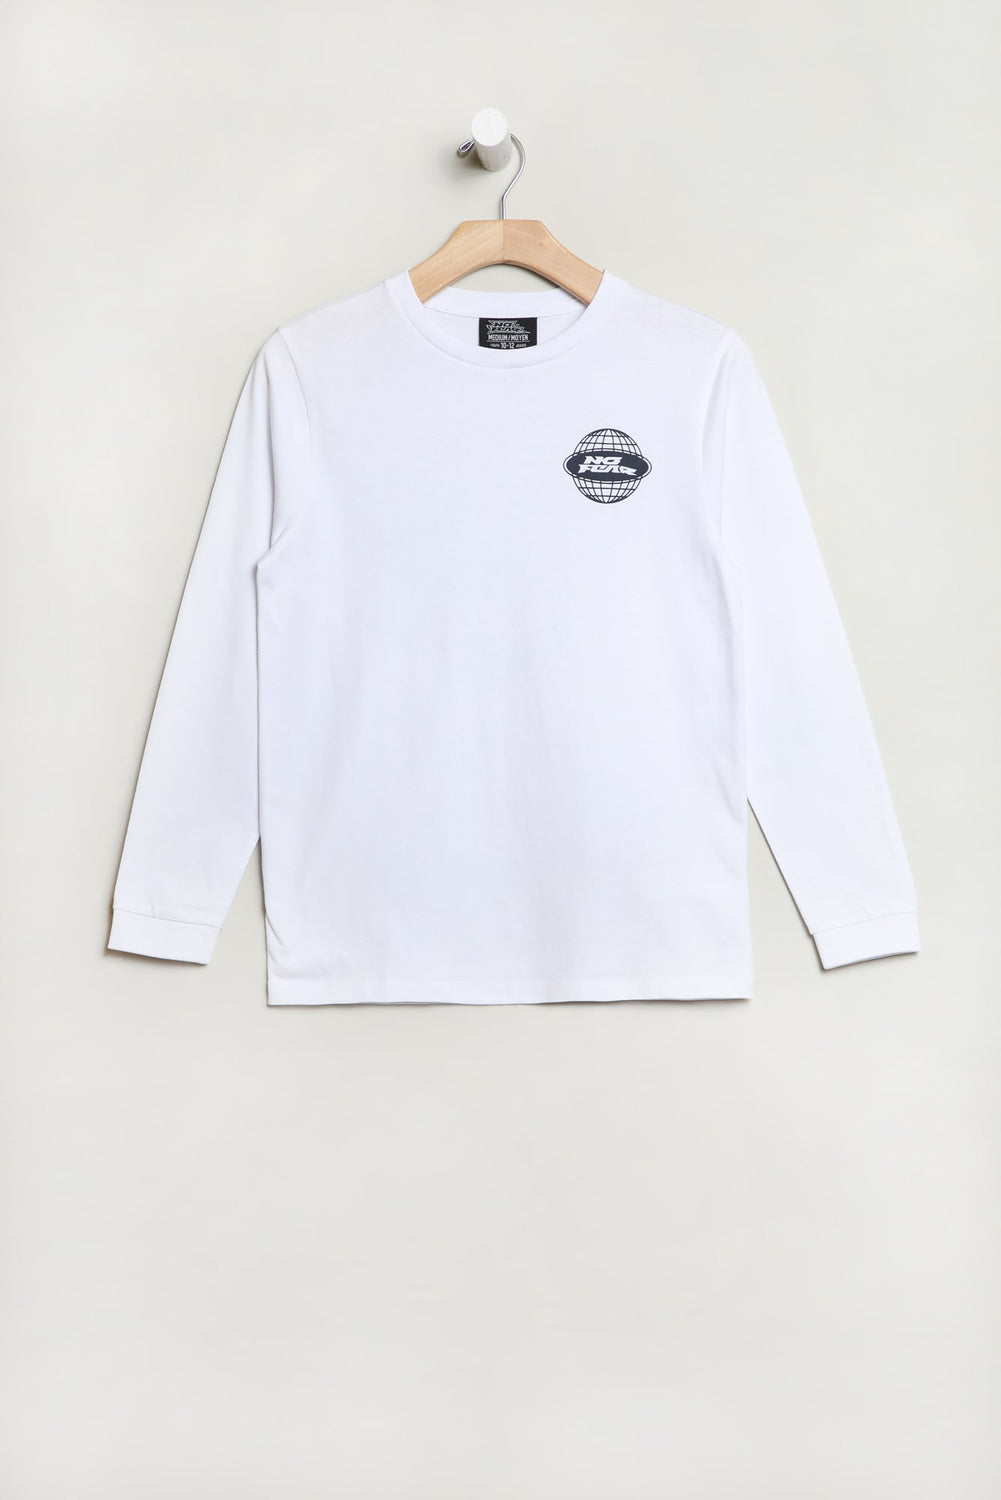 No Fear Youth Graphic Long Sleeve Top White